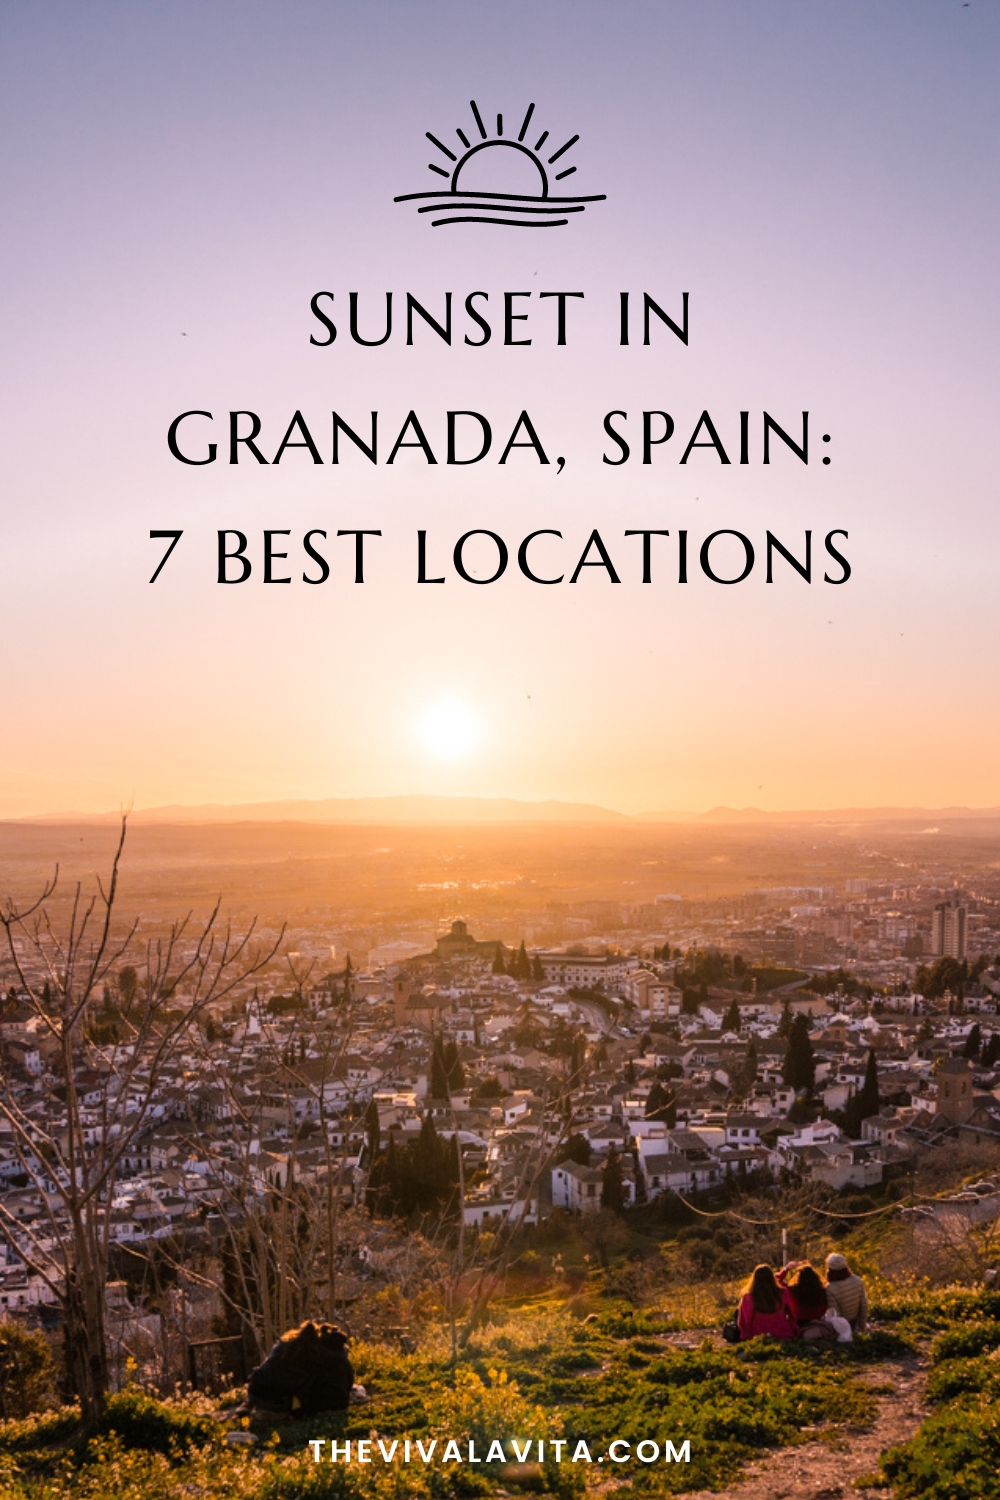 pinterest image with a picture of sunset in Granada, spain with a headline - best sunsets in granada, spain - 7 locations